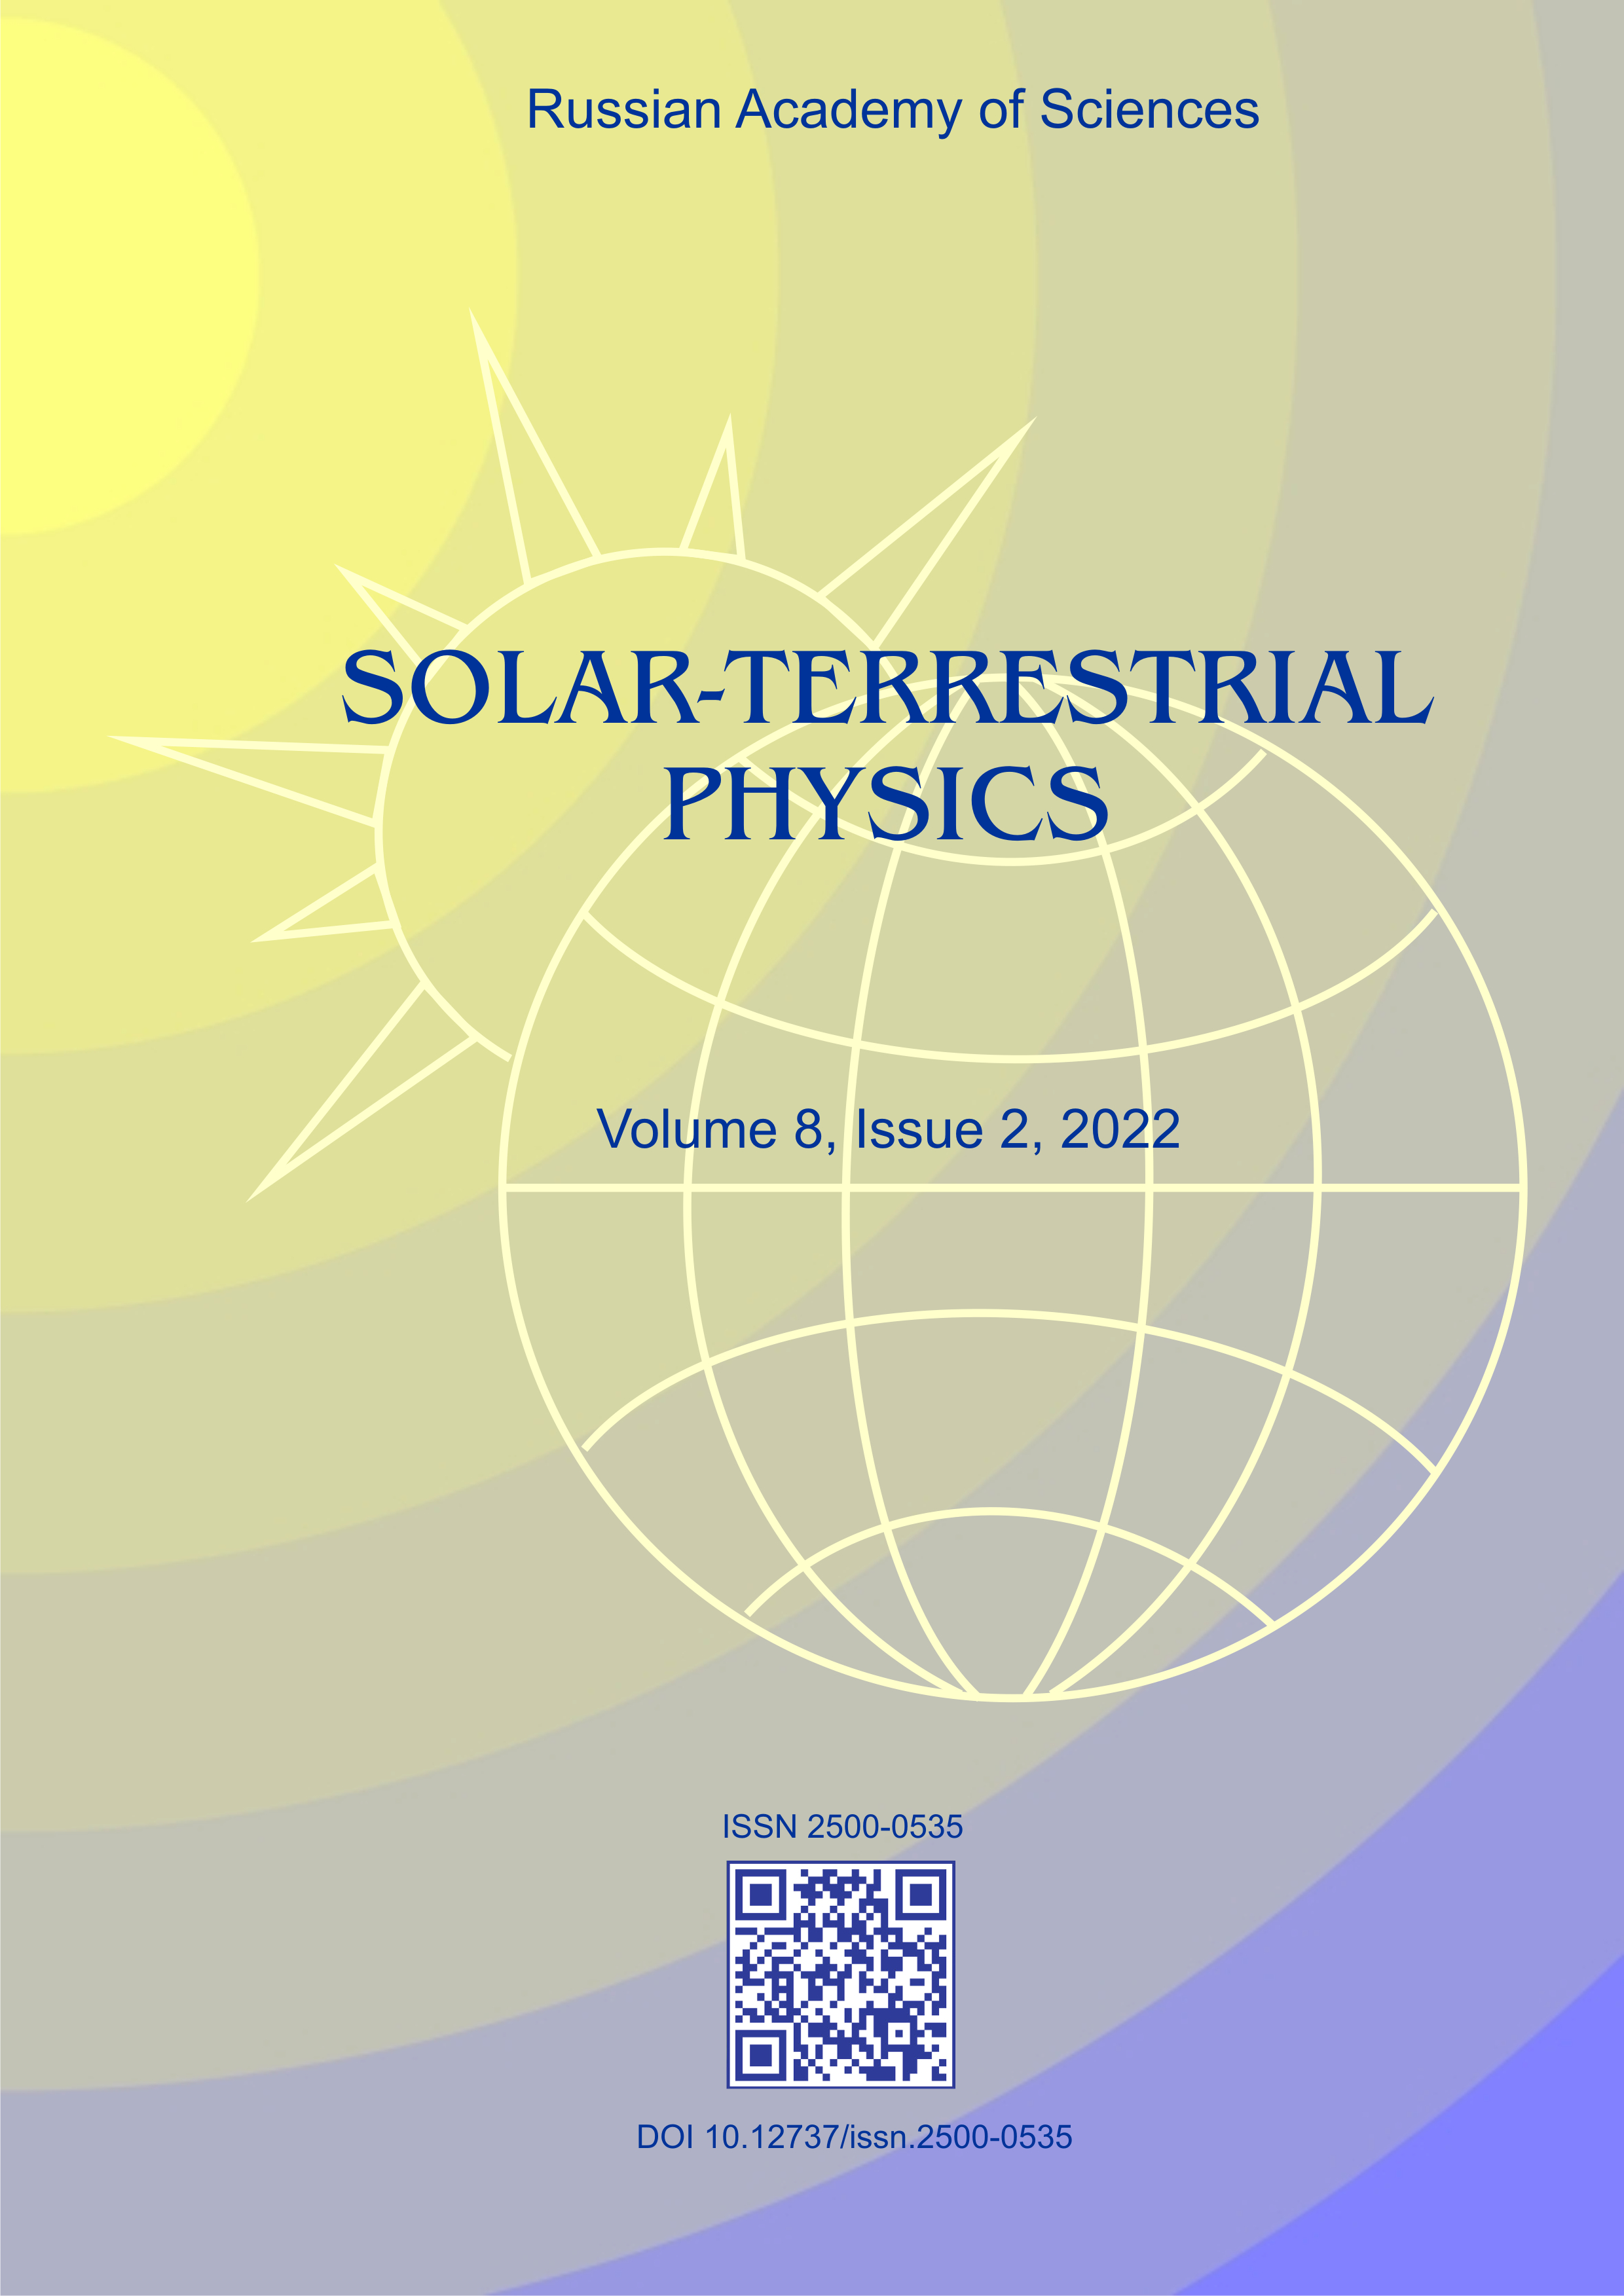             Correspondence of a global isolated substorm to the McPherron statistical model
    